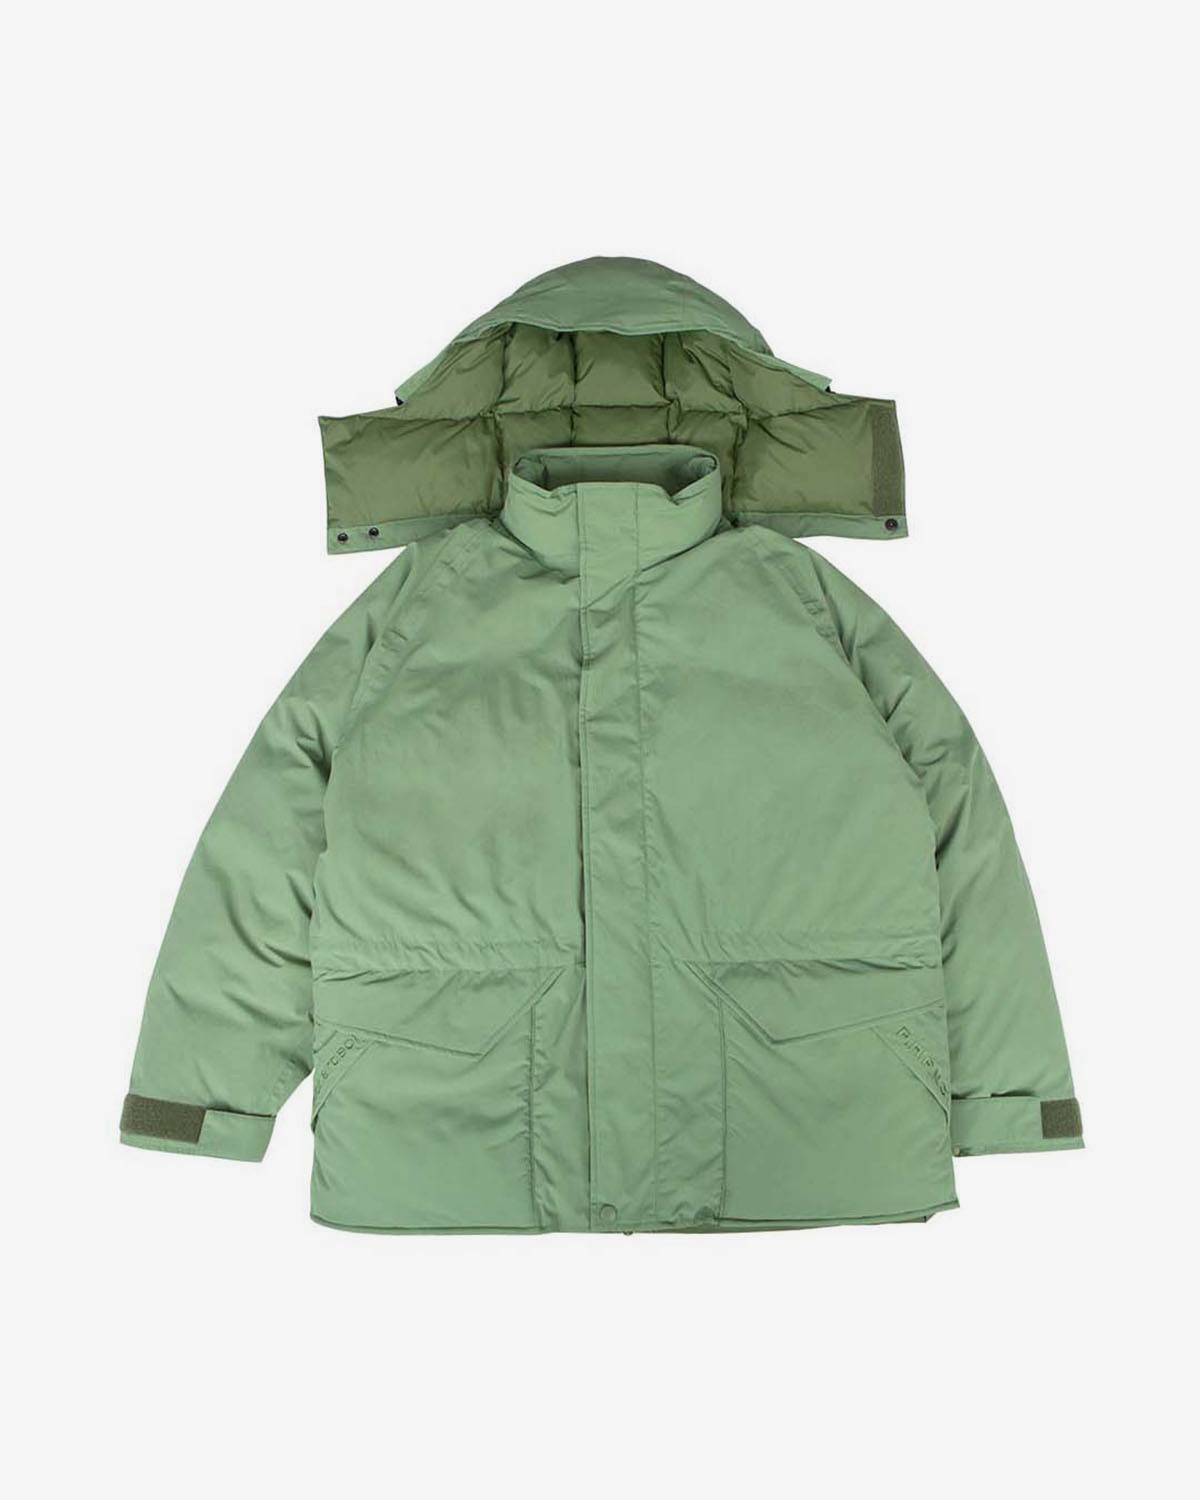 Richardson's FW21 Puffers Will Warm You When It's Brick